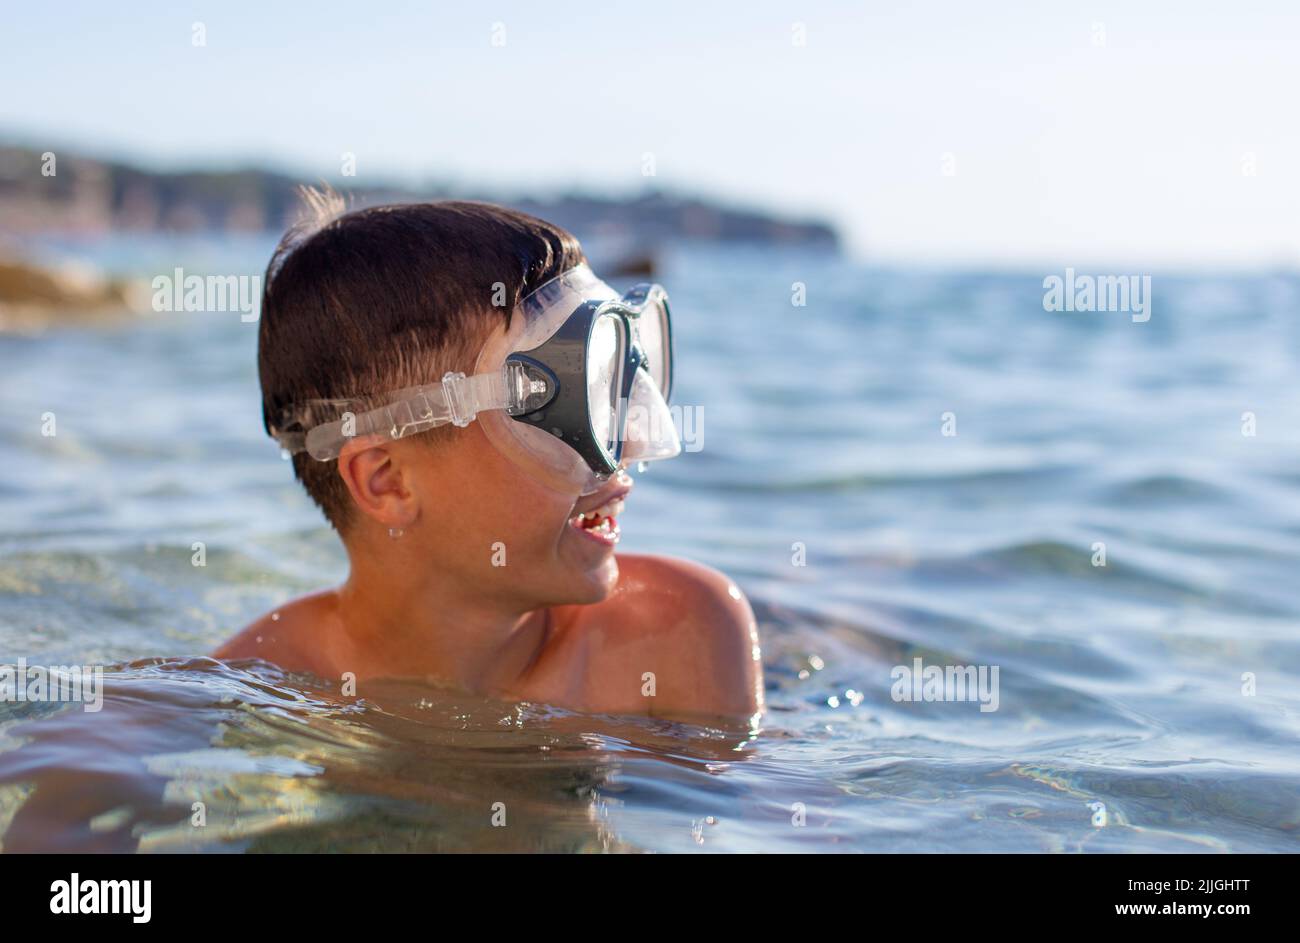 Young boy in sea with goggles Stock Photo